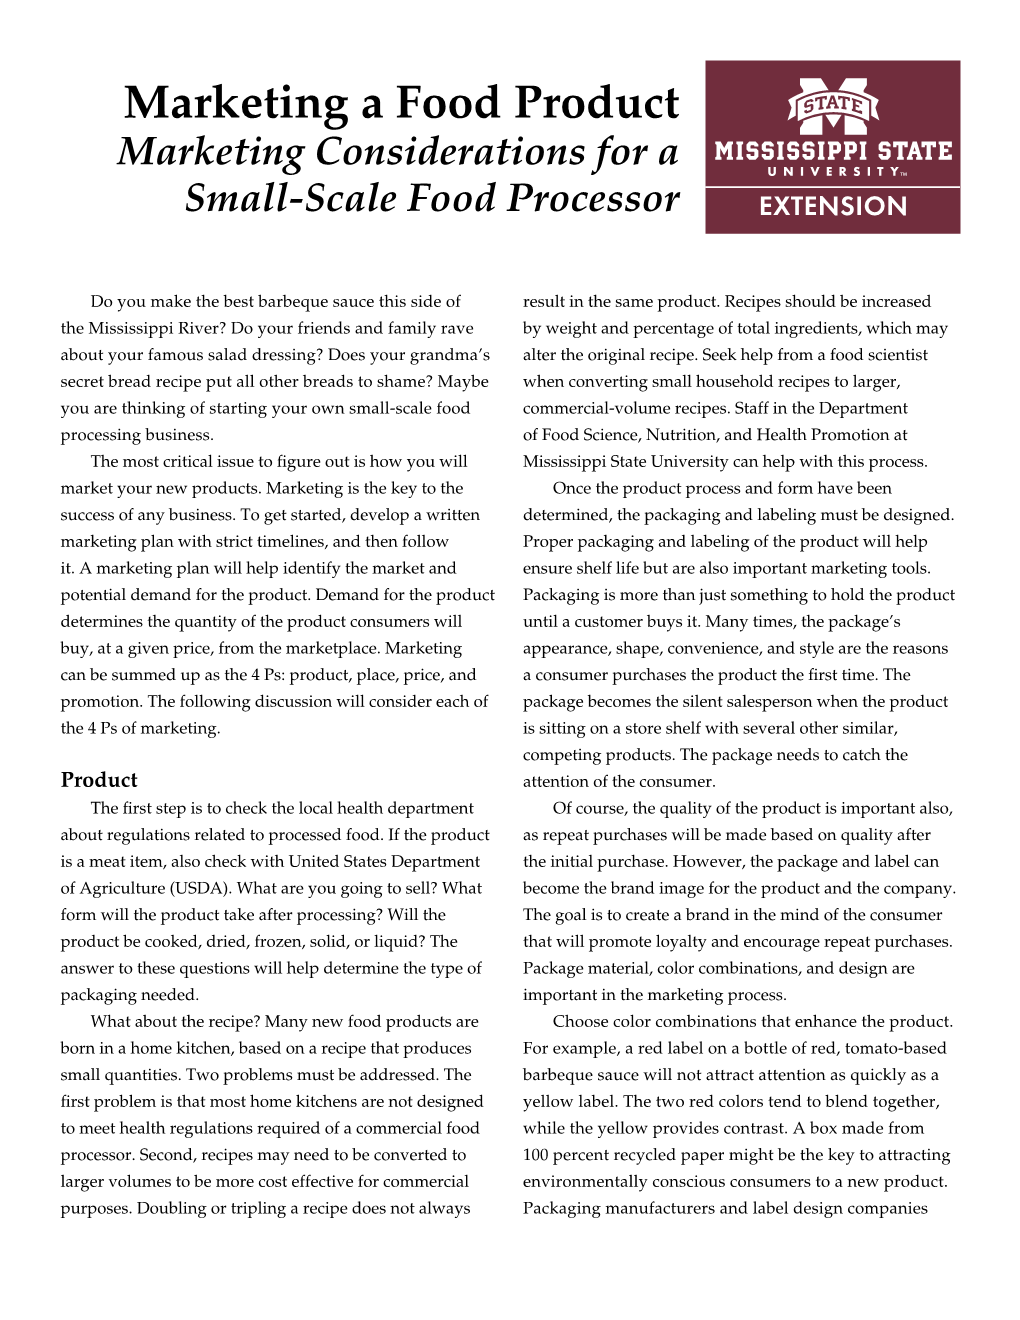 Marketing a Food Product Marketing Considerations for a Small-Scale Food Processor